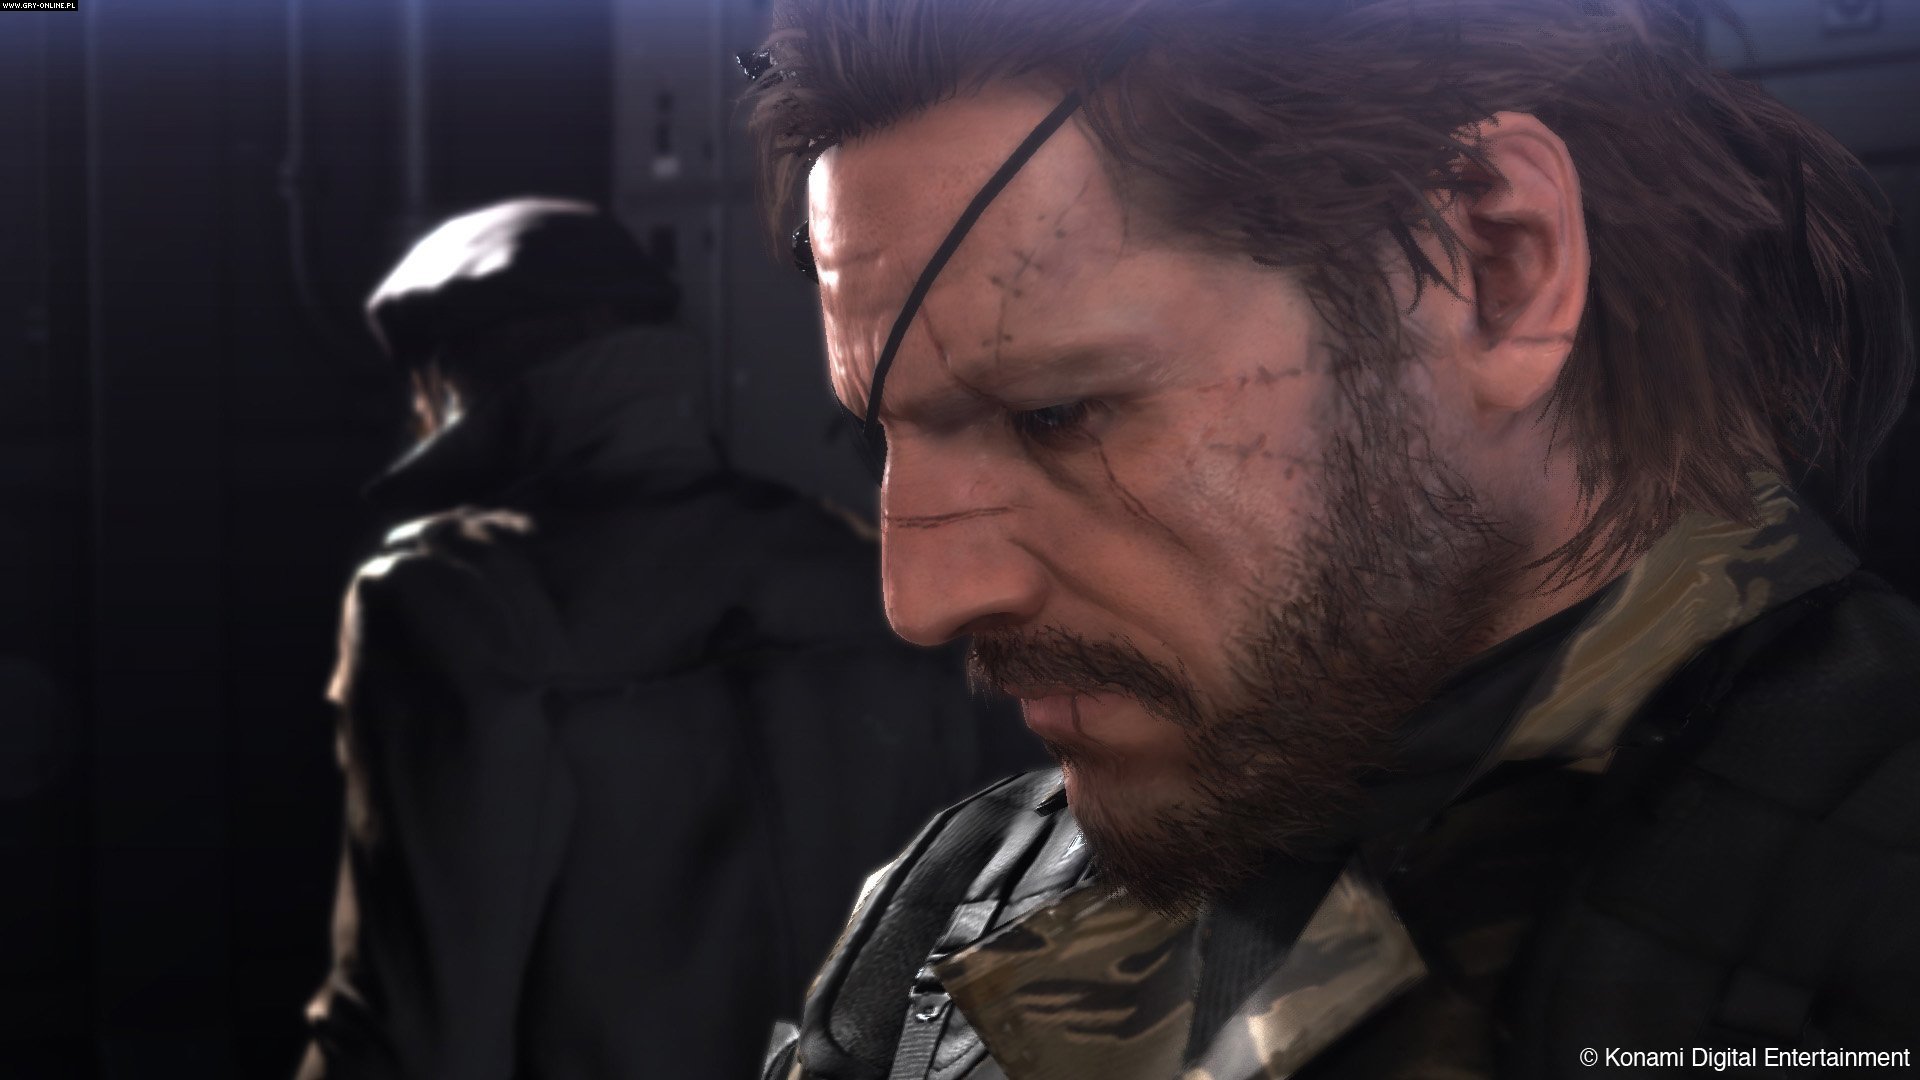 Awesome Metal Gear Solid 5 (V): The Phantom Pain (MGSV 5) free wallpaper ID:460327 for full hd 1920x1080 computer